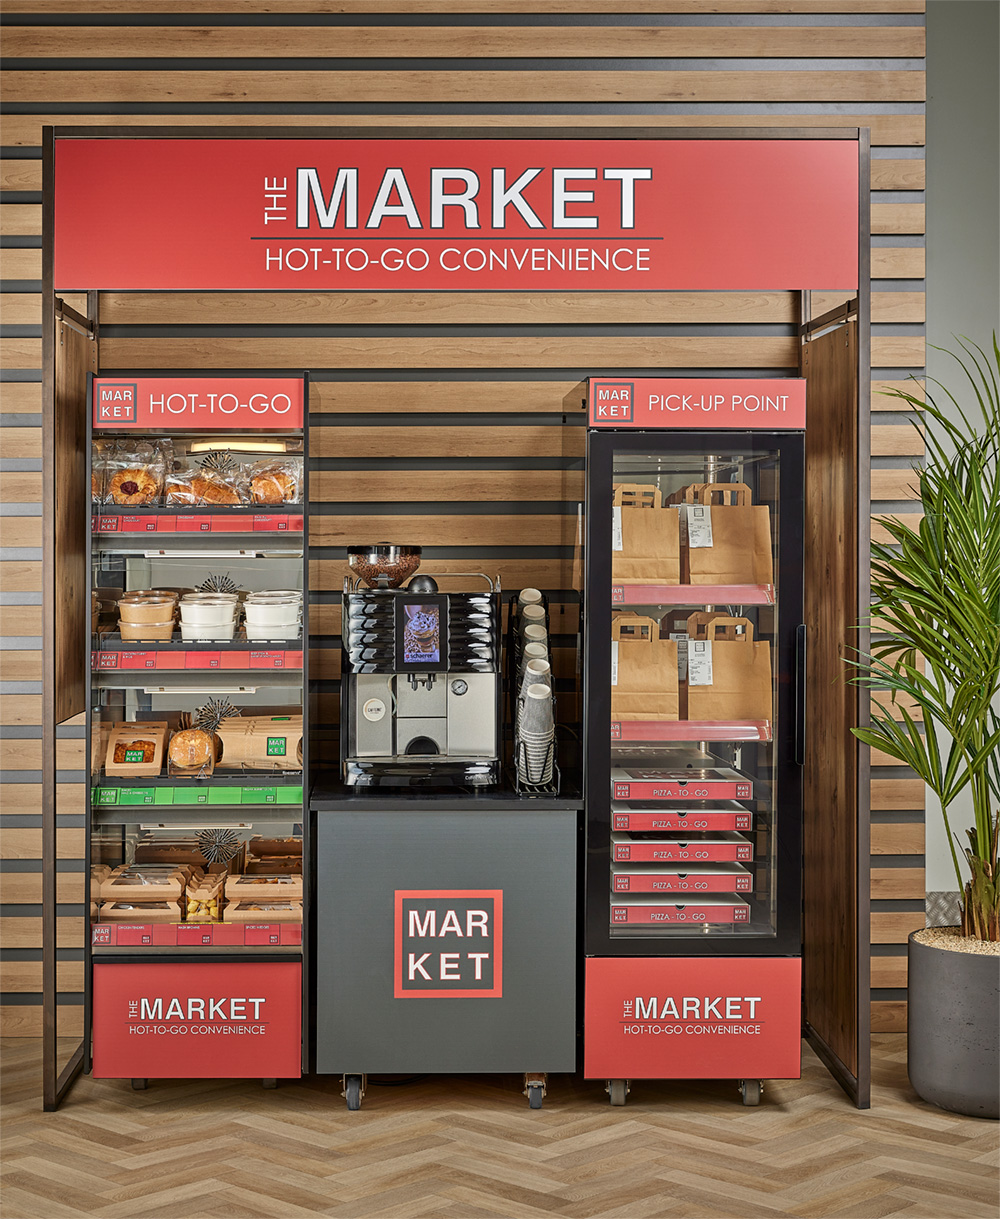 Flexeserve Zone and Flexeserve Hub within a self-service hot food-to-go Micro Market